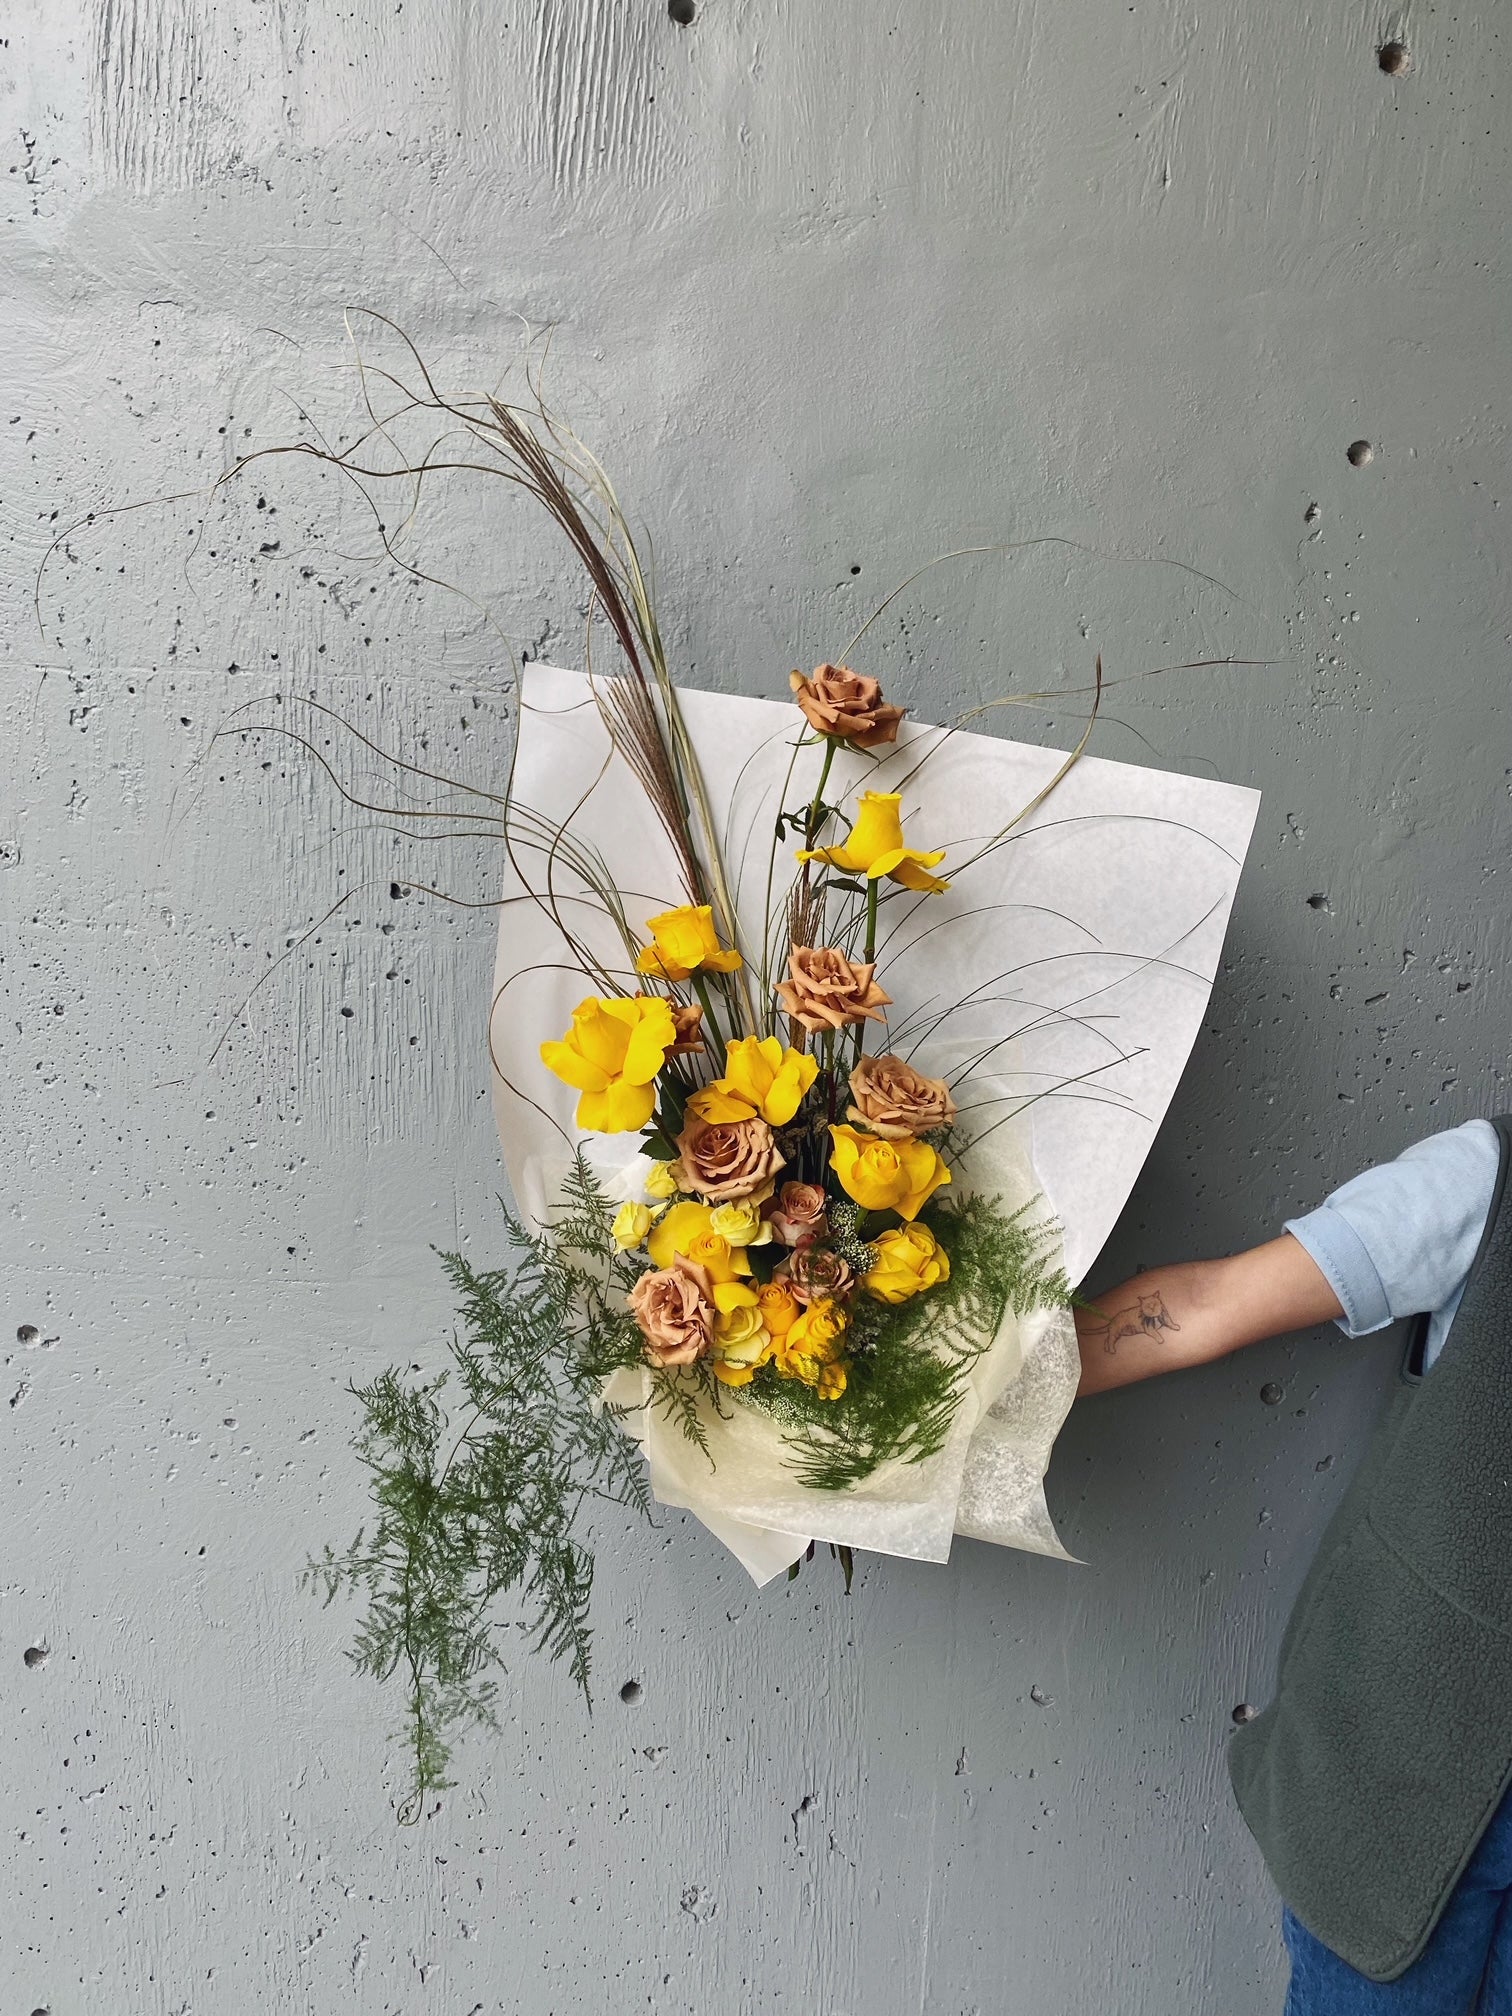 The "All or Nothing" Bouquet